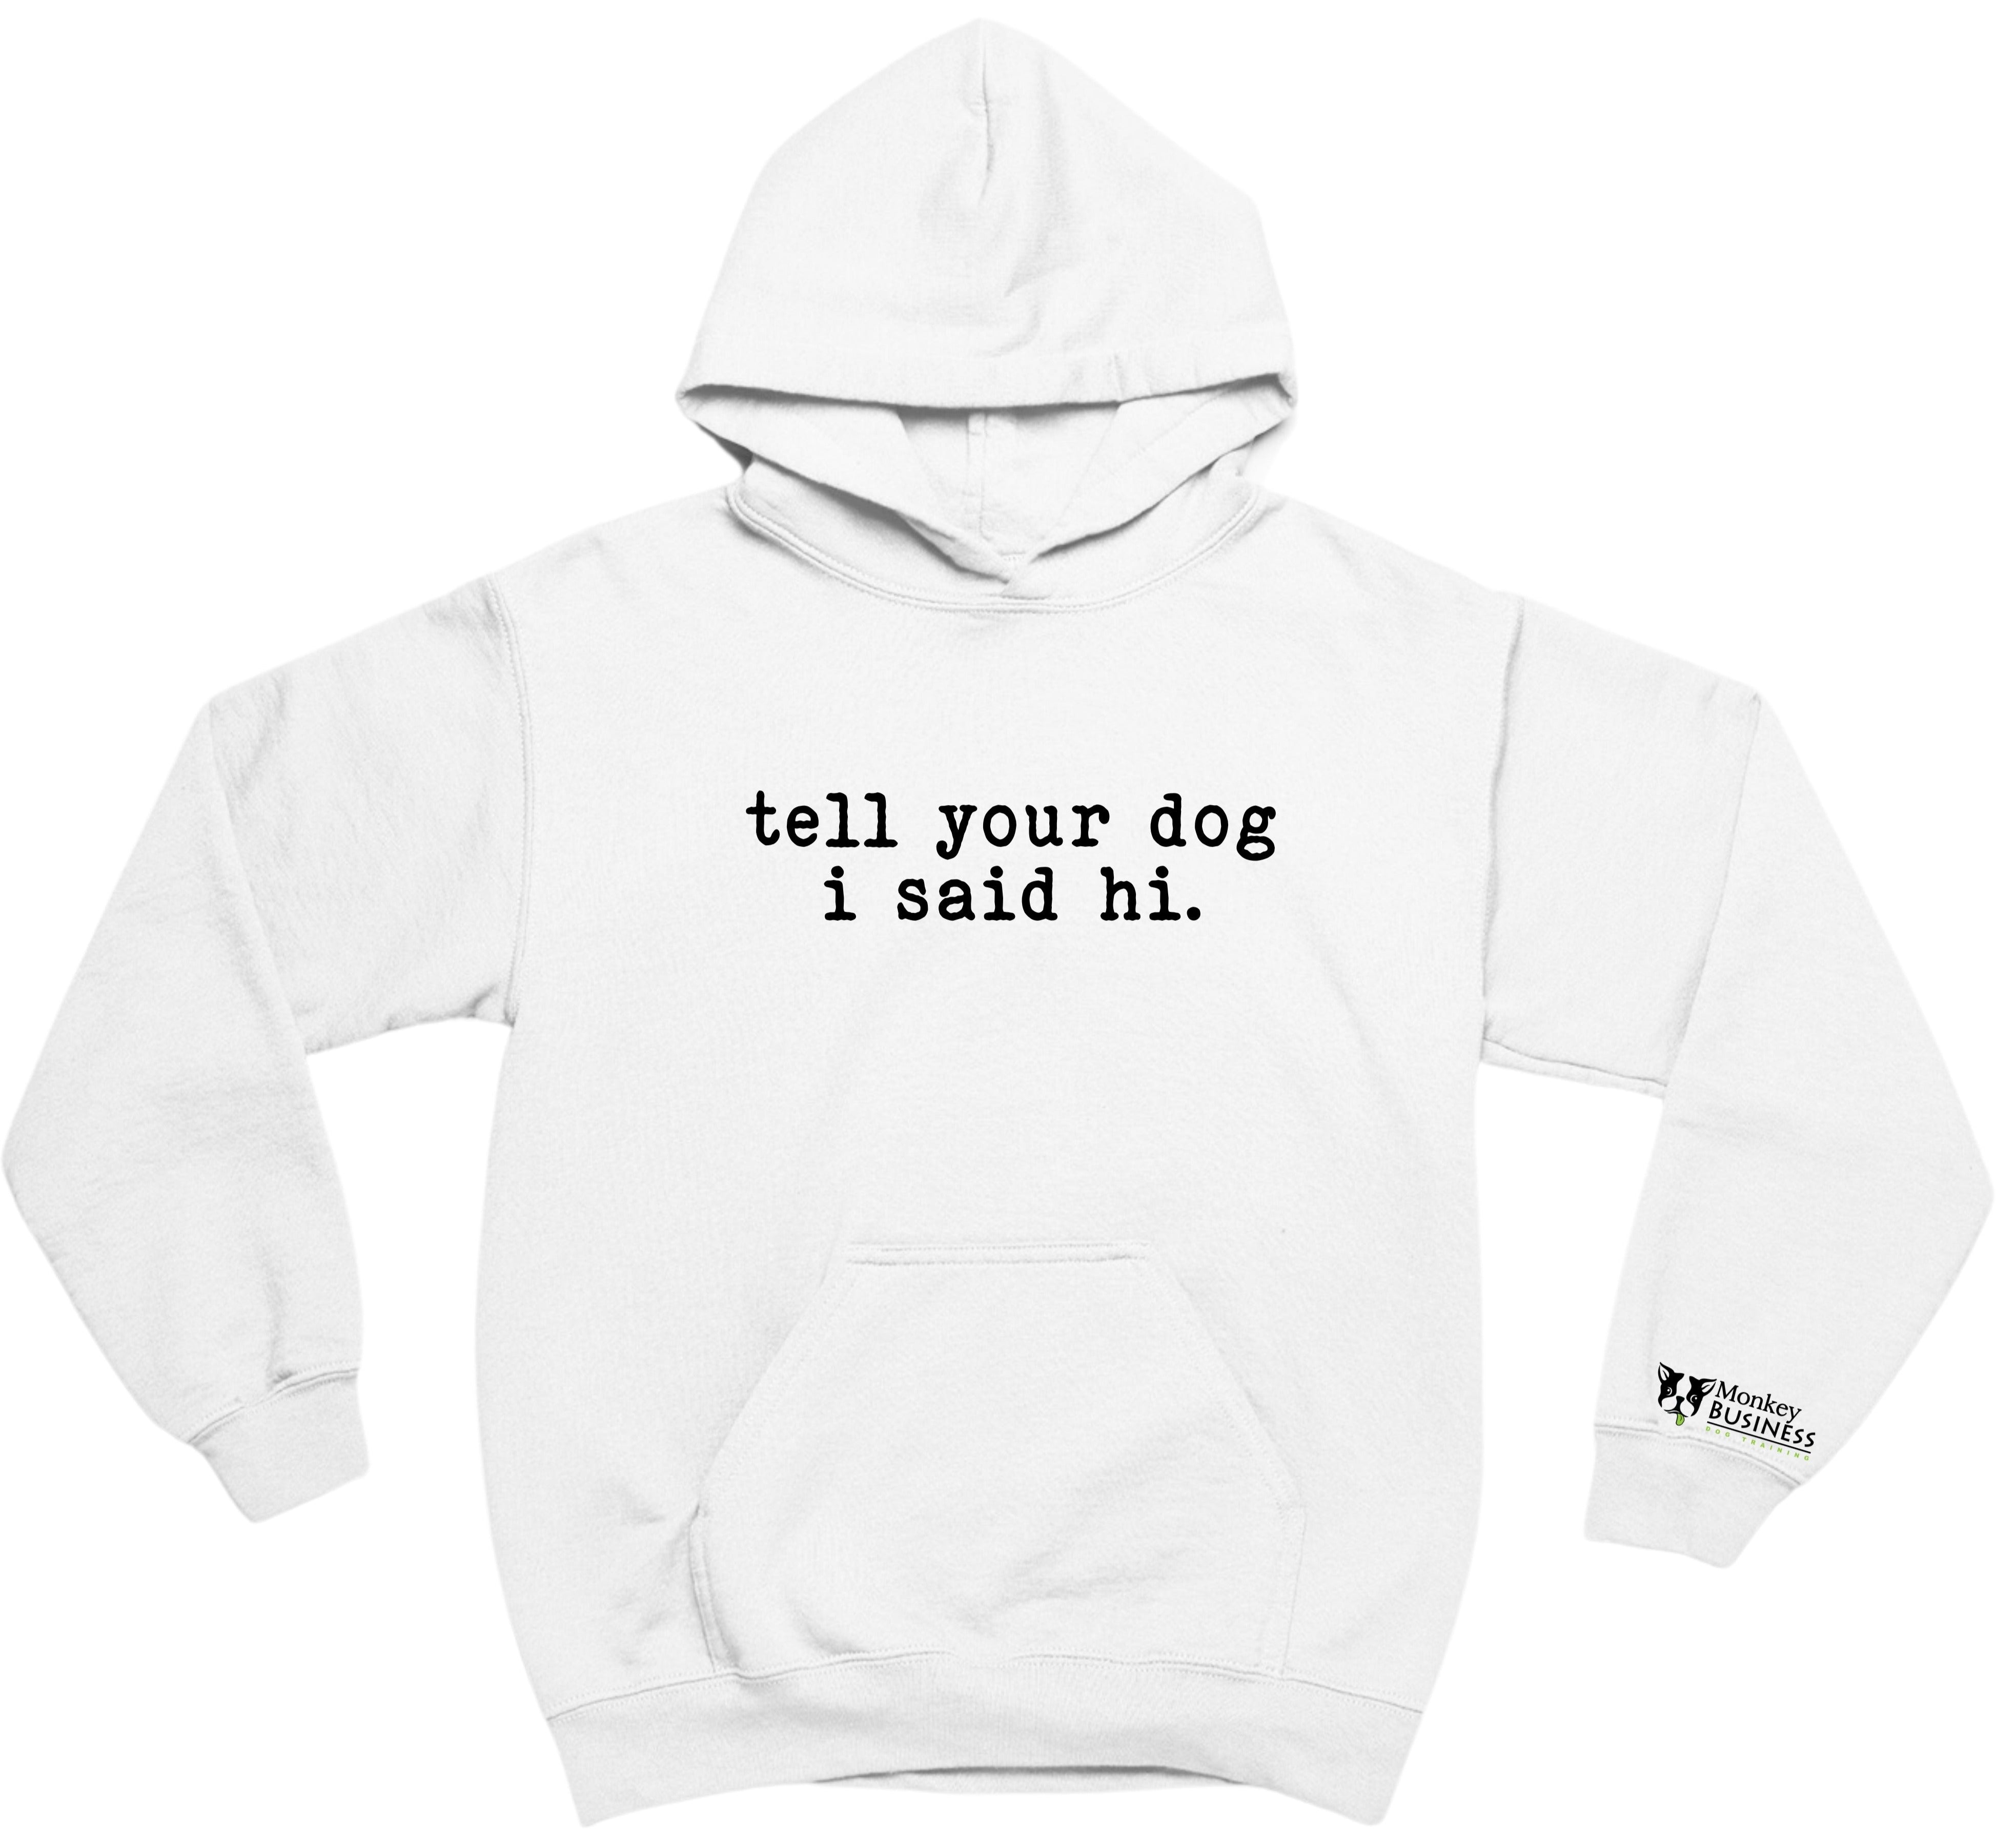 MB Hoodie- Say Hi To Your Dog